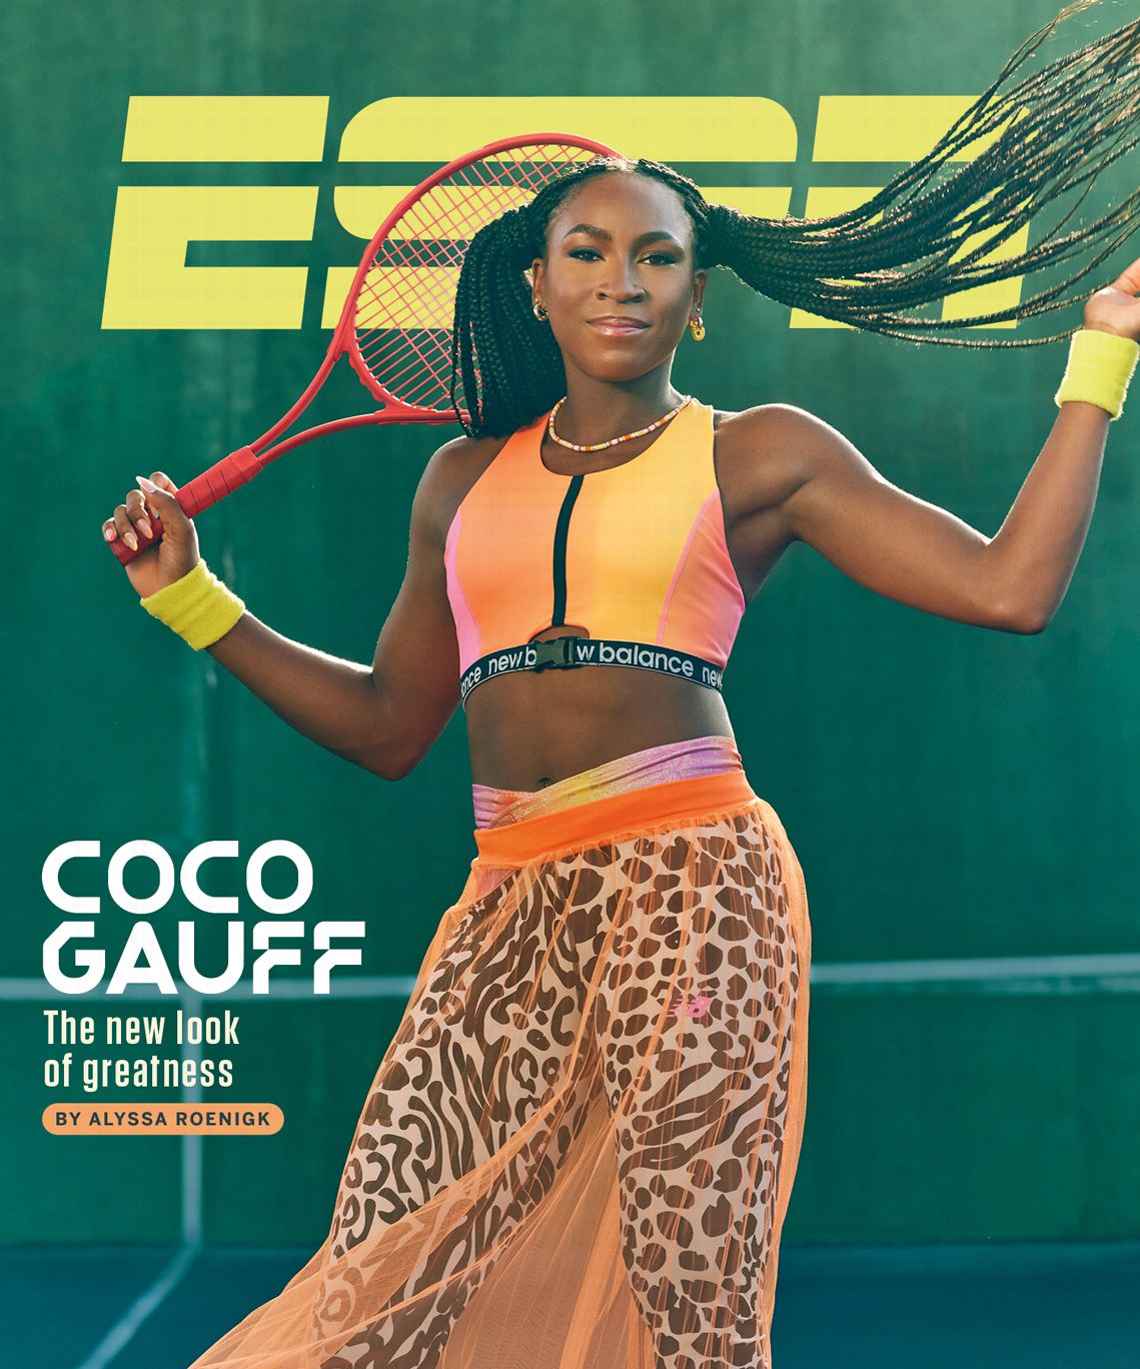 The rise of Coco Gauff